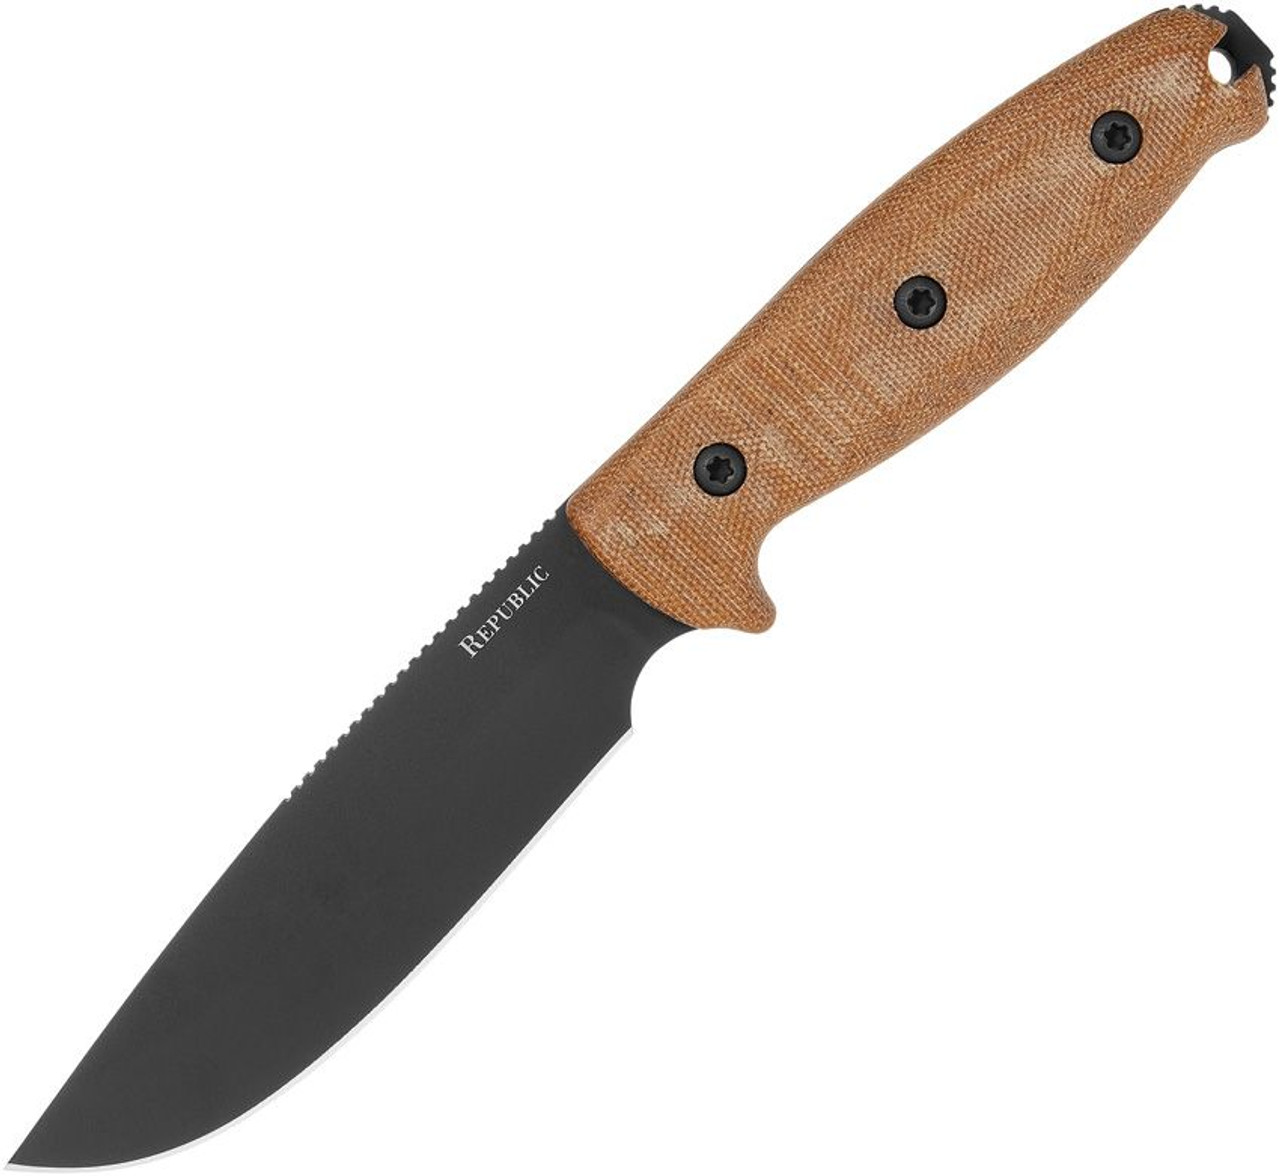 Cold Steel Republic Bushcraft. Black S35VN stainless blade. Natural canvas micarta handle.